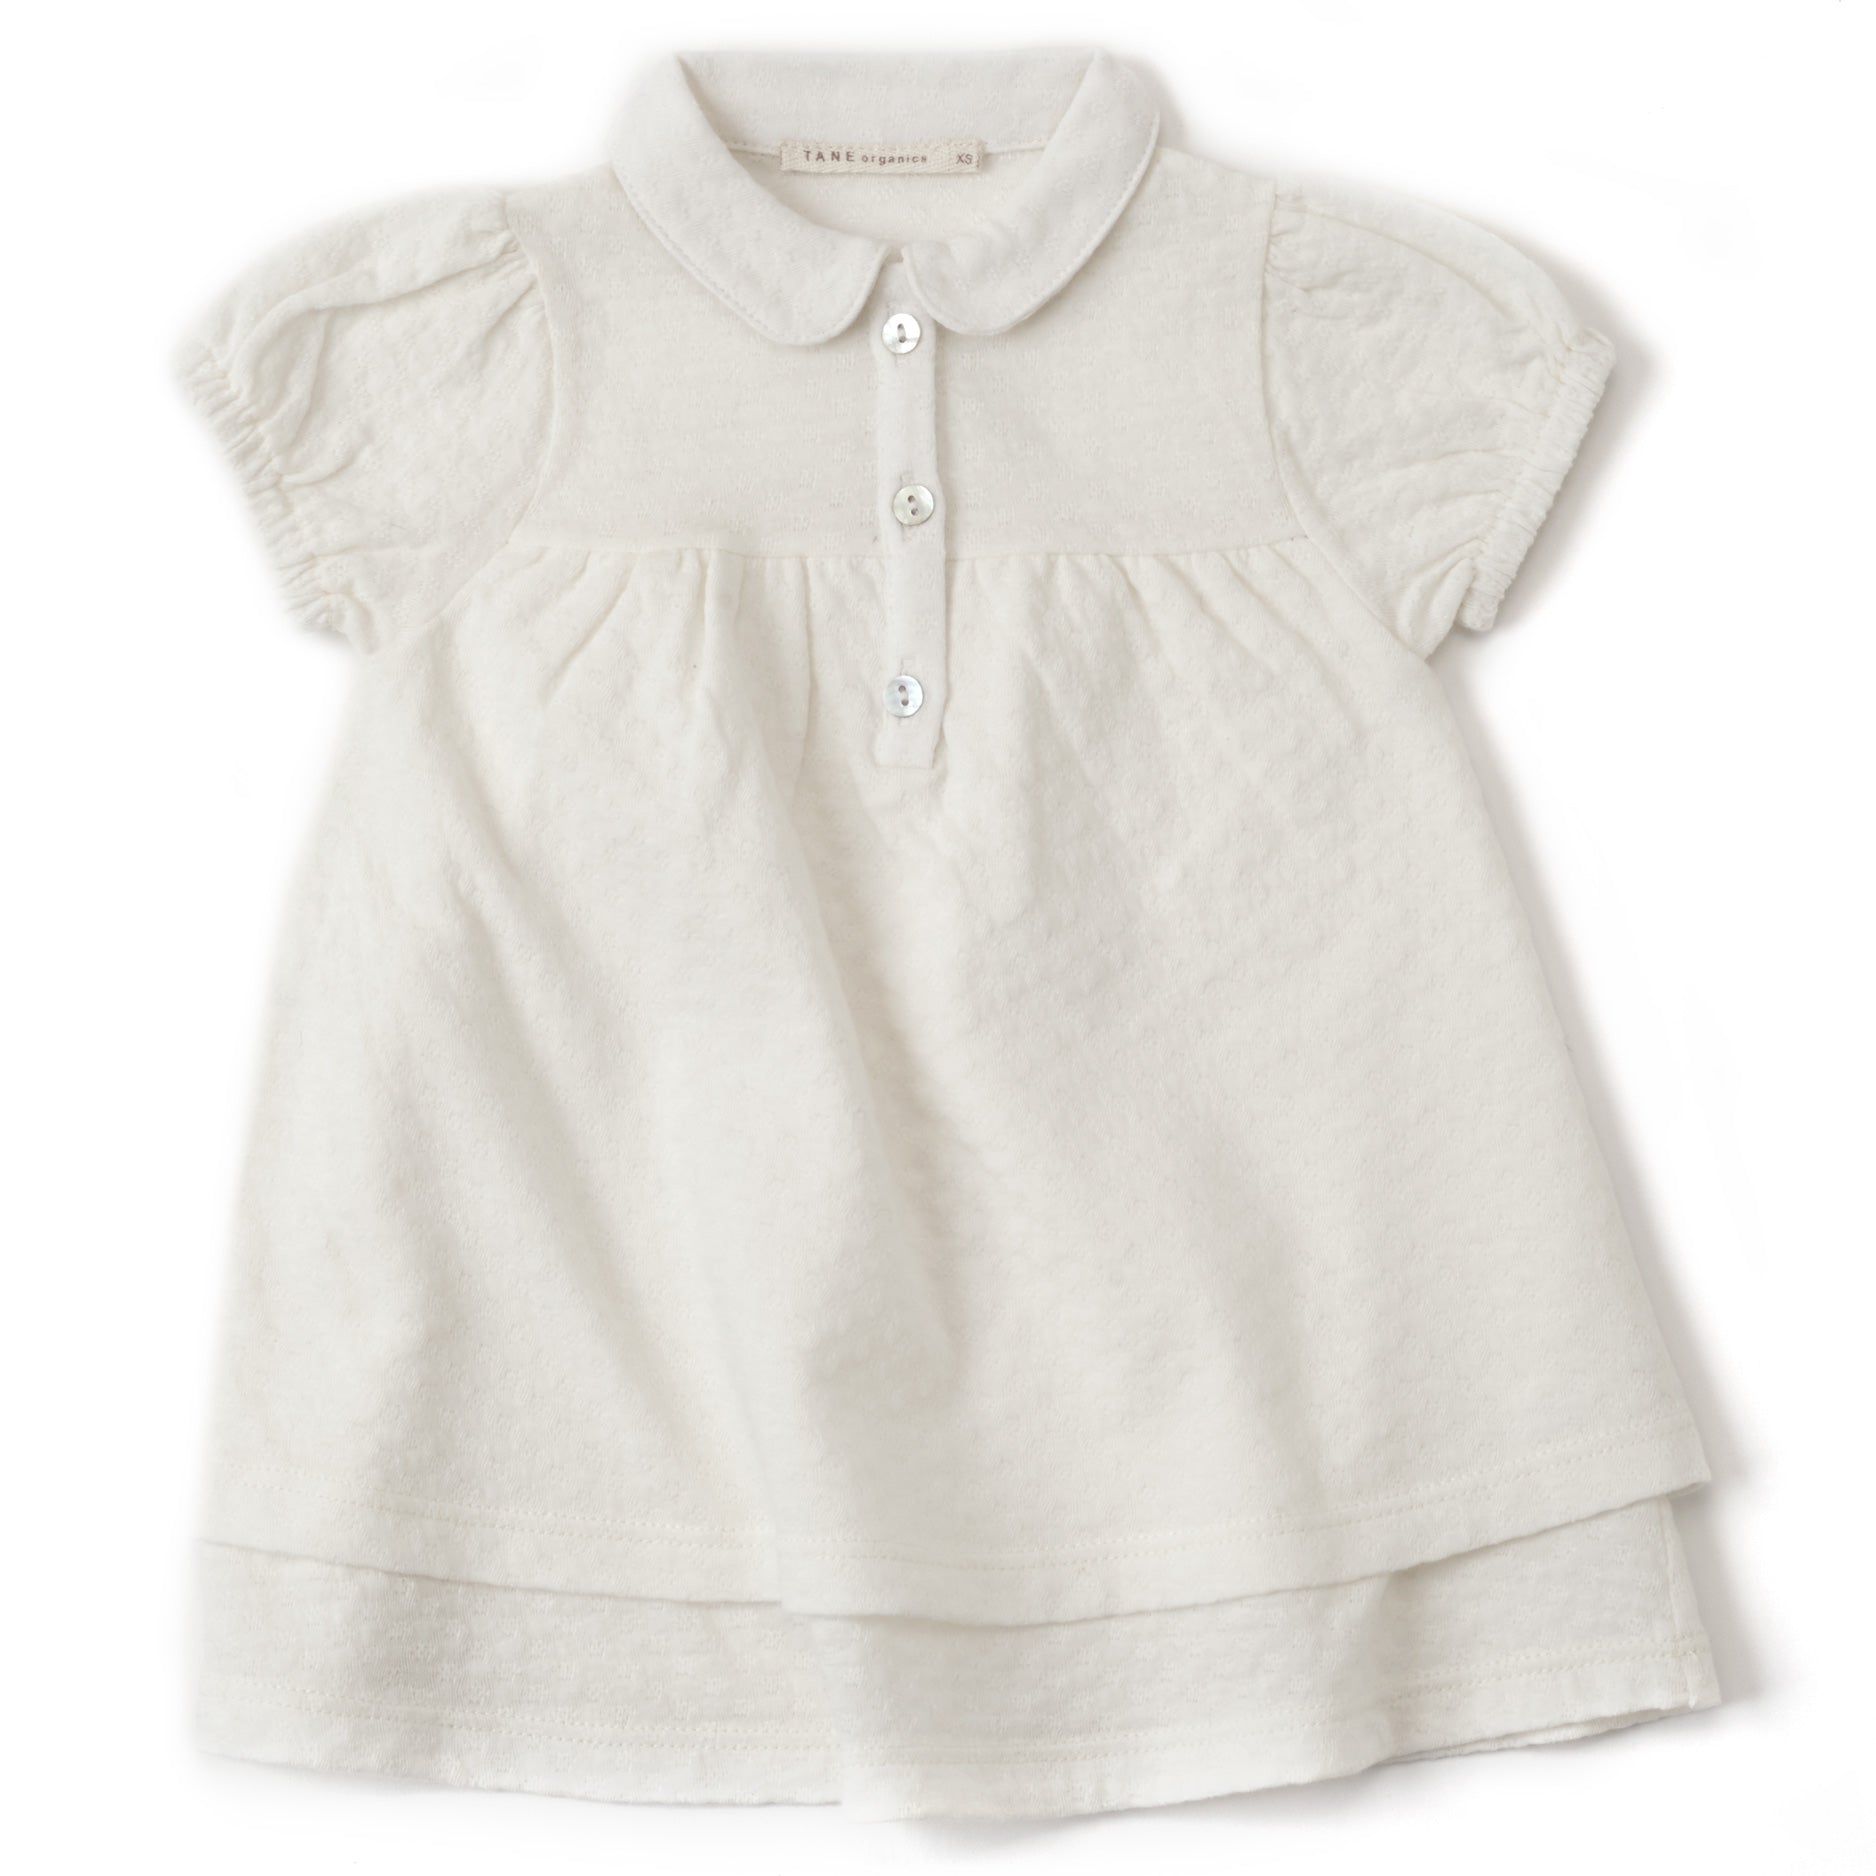 cream color pointelle double layered cap sleeved dress with peter pan collars and 3 natural shell buttons at the center front.  Soft elastics at cuffs with delicate shirrings at the sleeves and the bodice.  100% organic cotton pointelle knit.